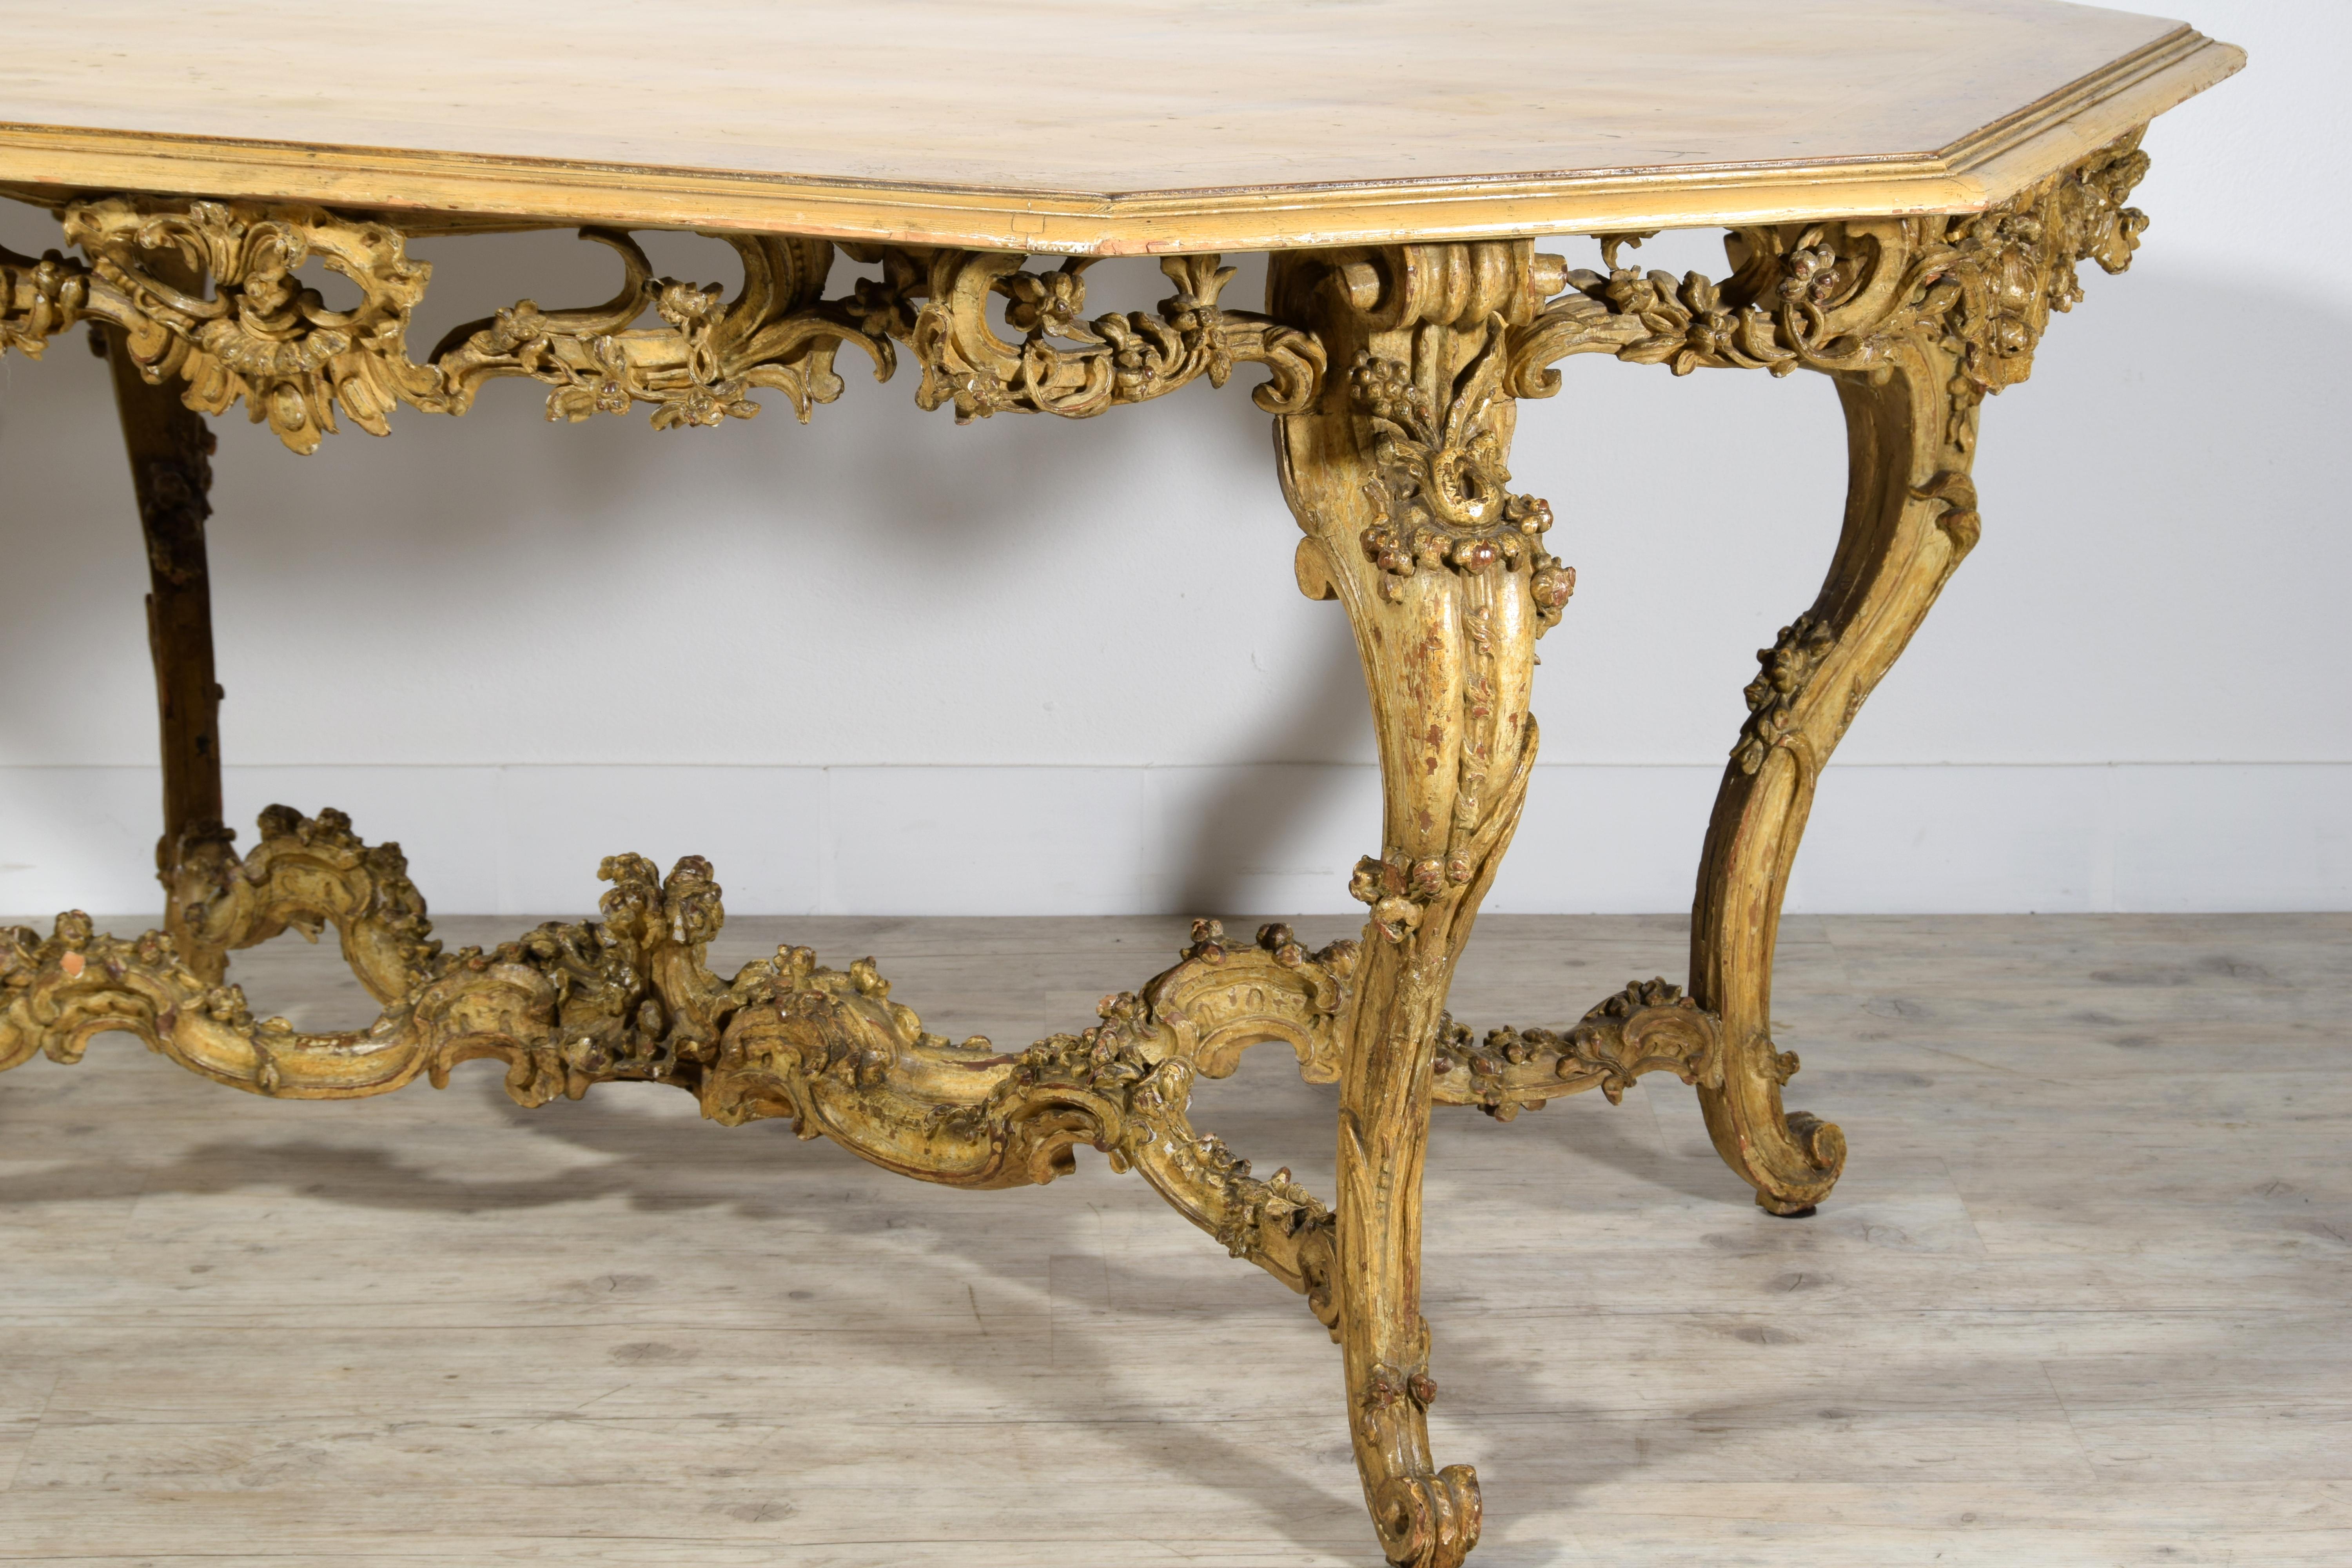 Italian Baroque Carved Gilt and Lacquered Wood Center Table, 18th Century For Sale 7